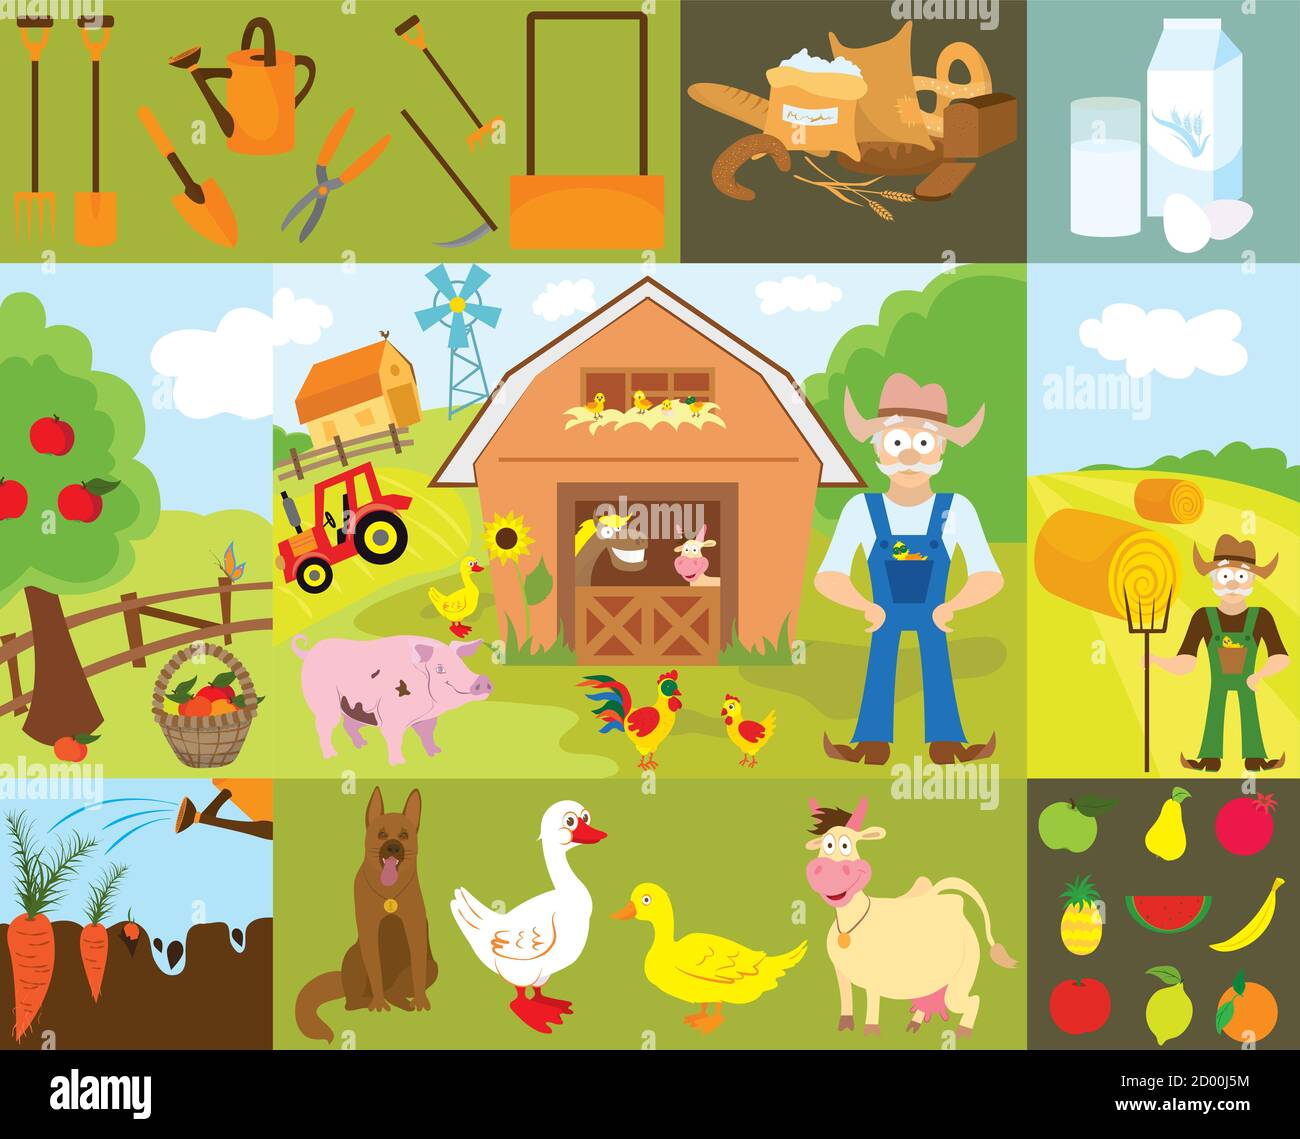 Big set of cartoon characters and elements of the farm. Buildings, people, livestock, animals, cars, trees, vegetables, fruits, inventory. Isolated Stock Vector